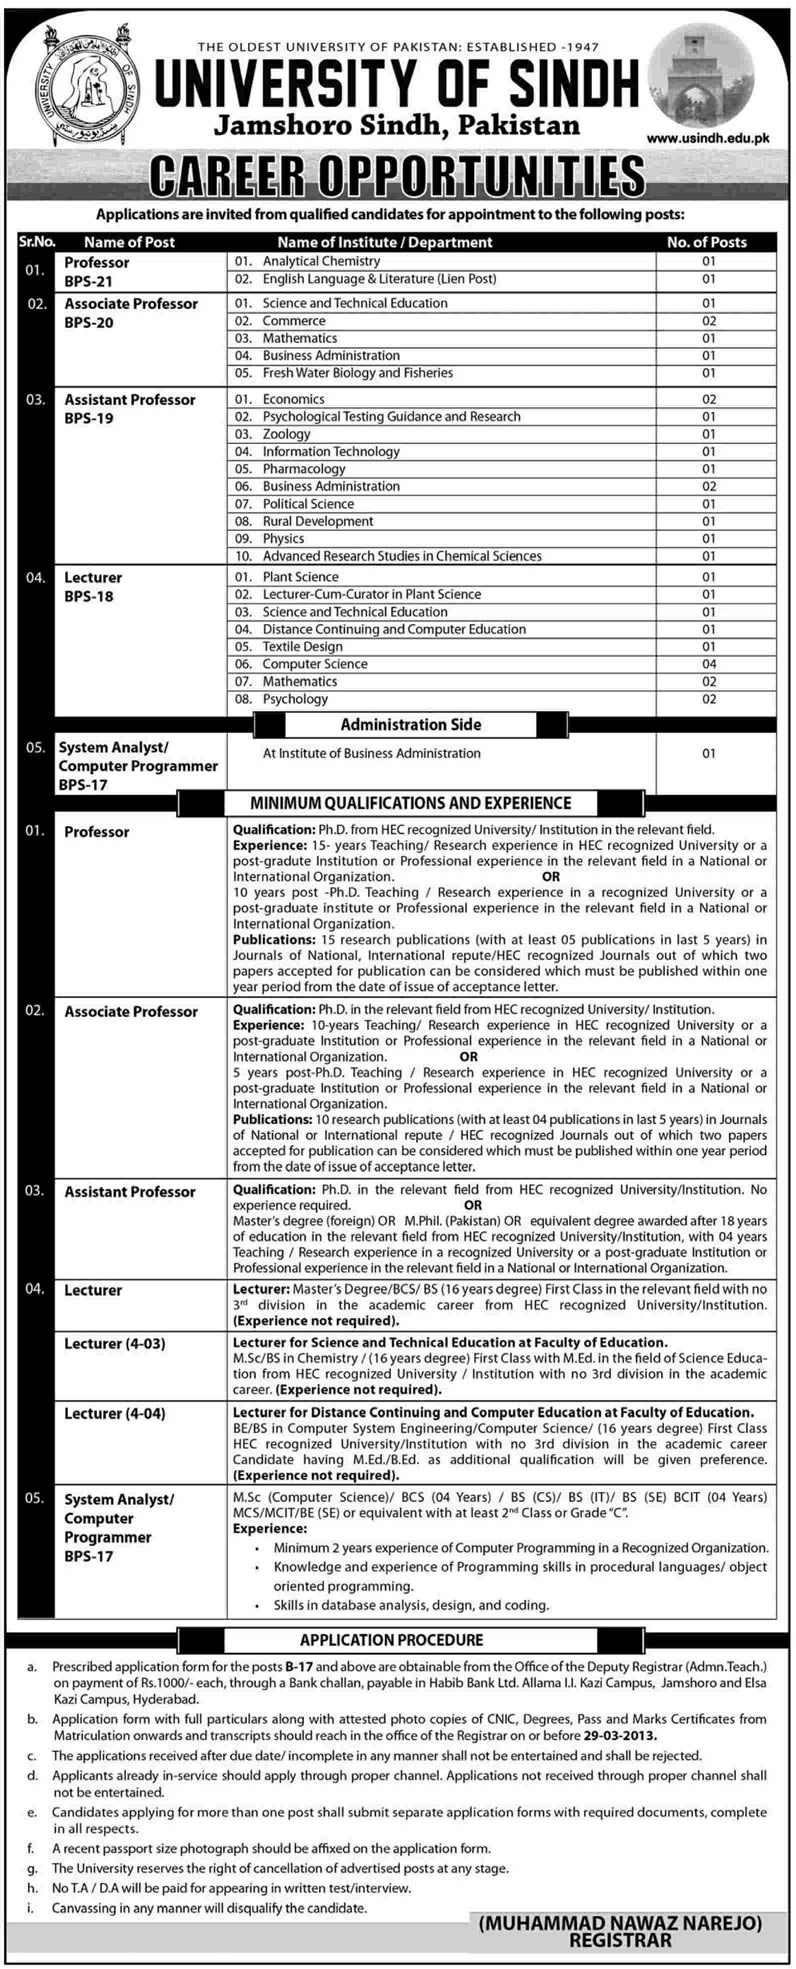 University of Sindh, Jamshoro Jobs 2013 for Faculty & Administration